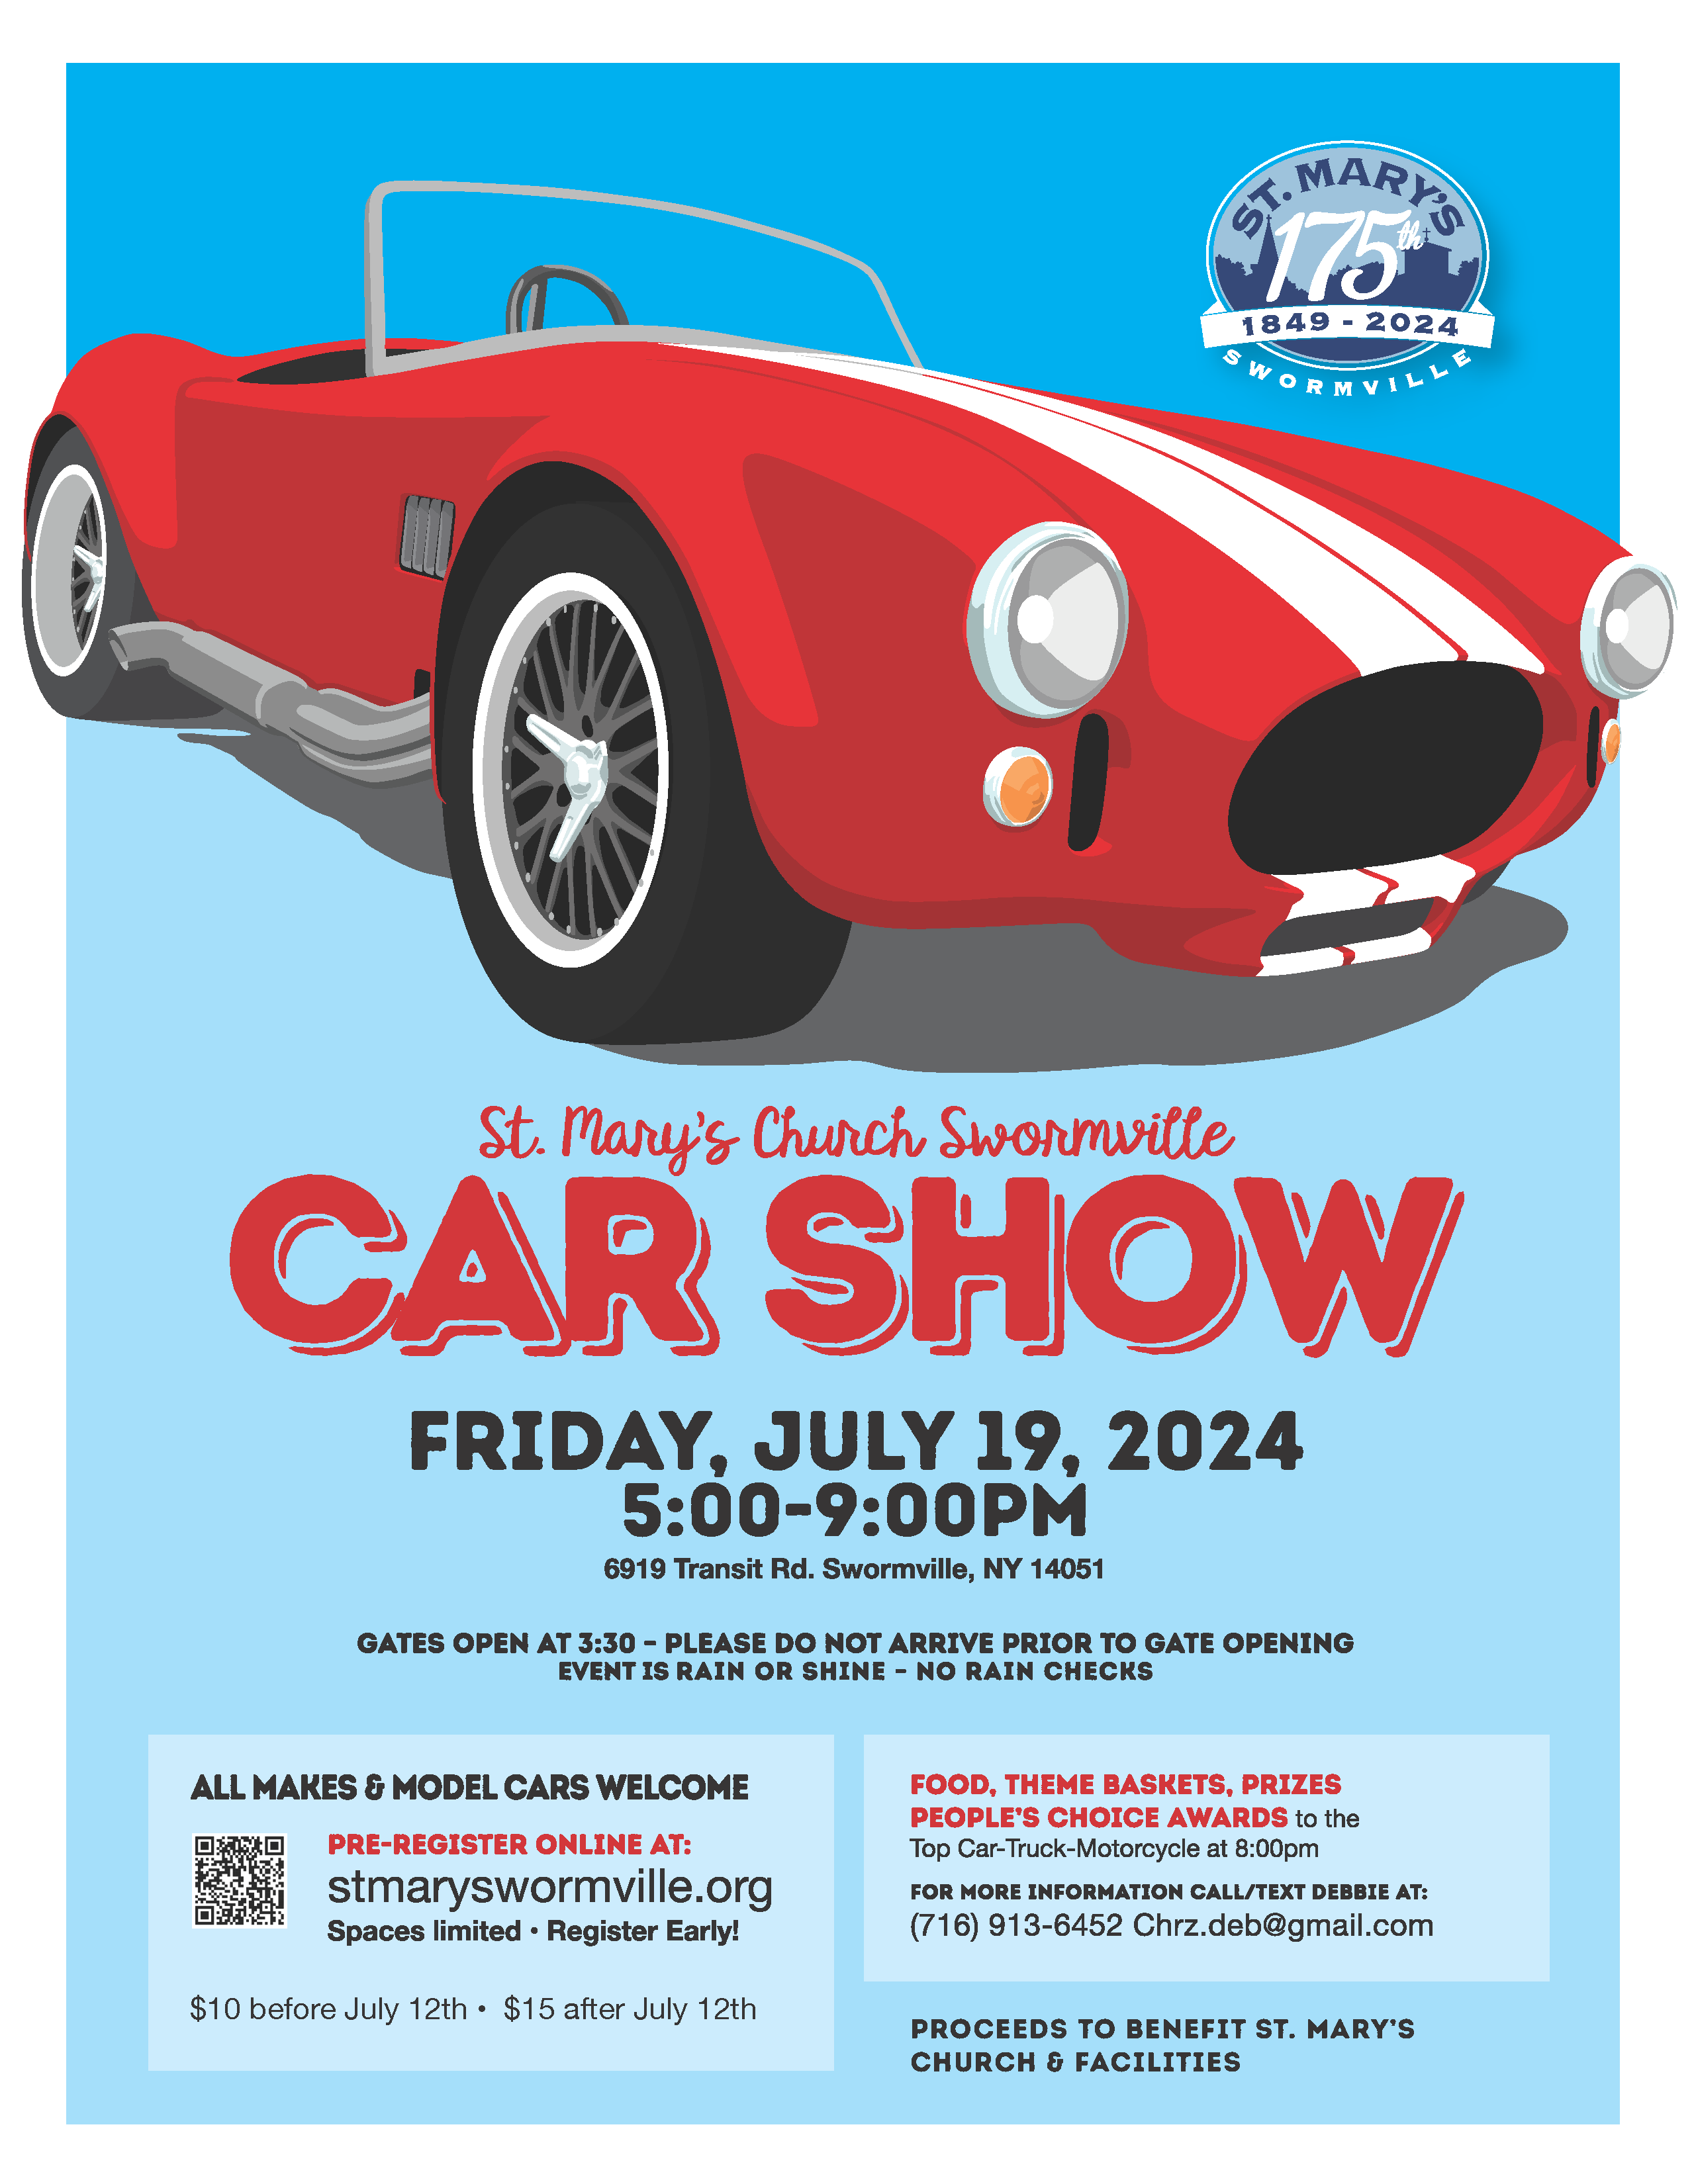 St. Mary's Car Show July 19